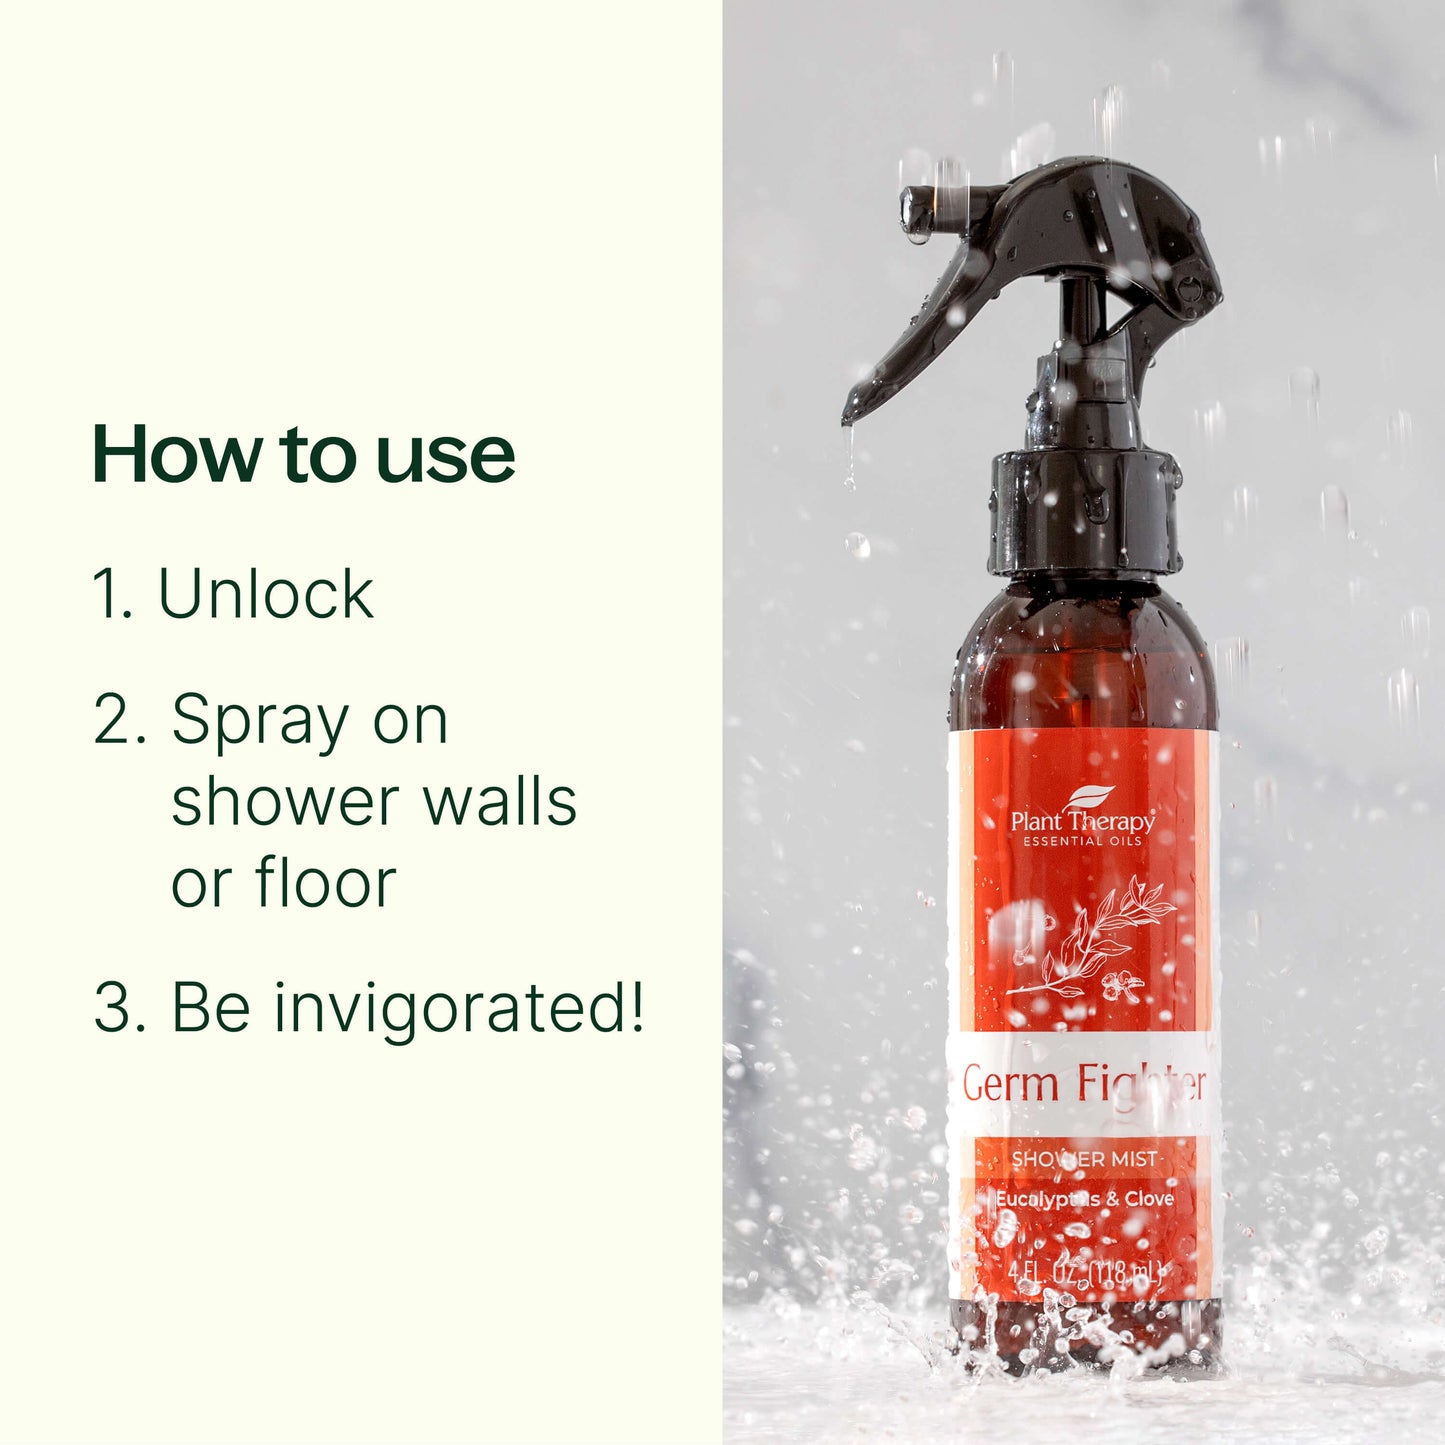 how to use Germ Fighter Shower Mist